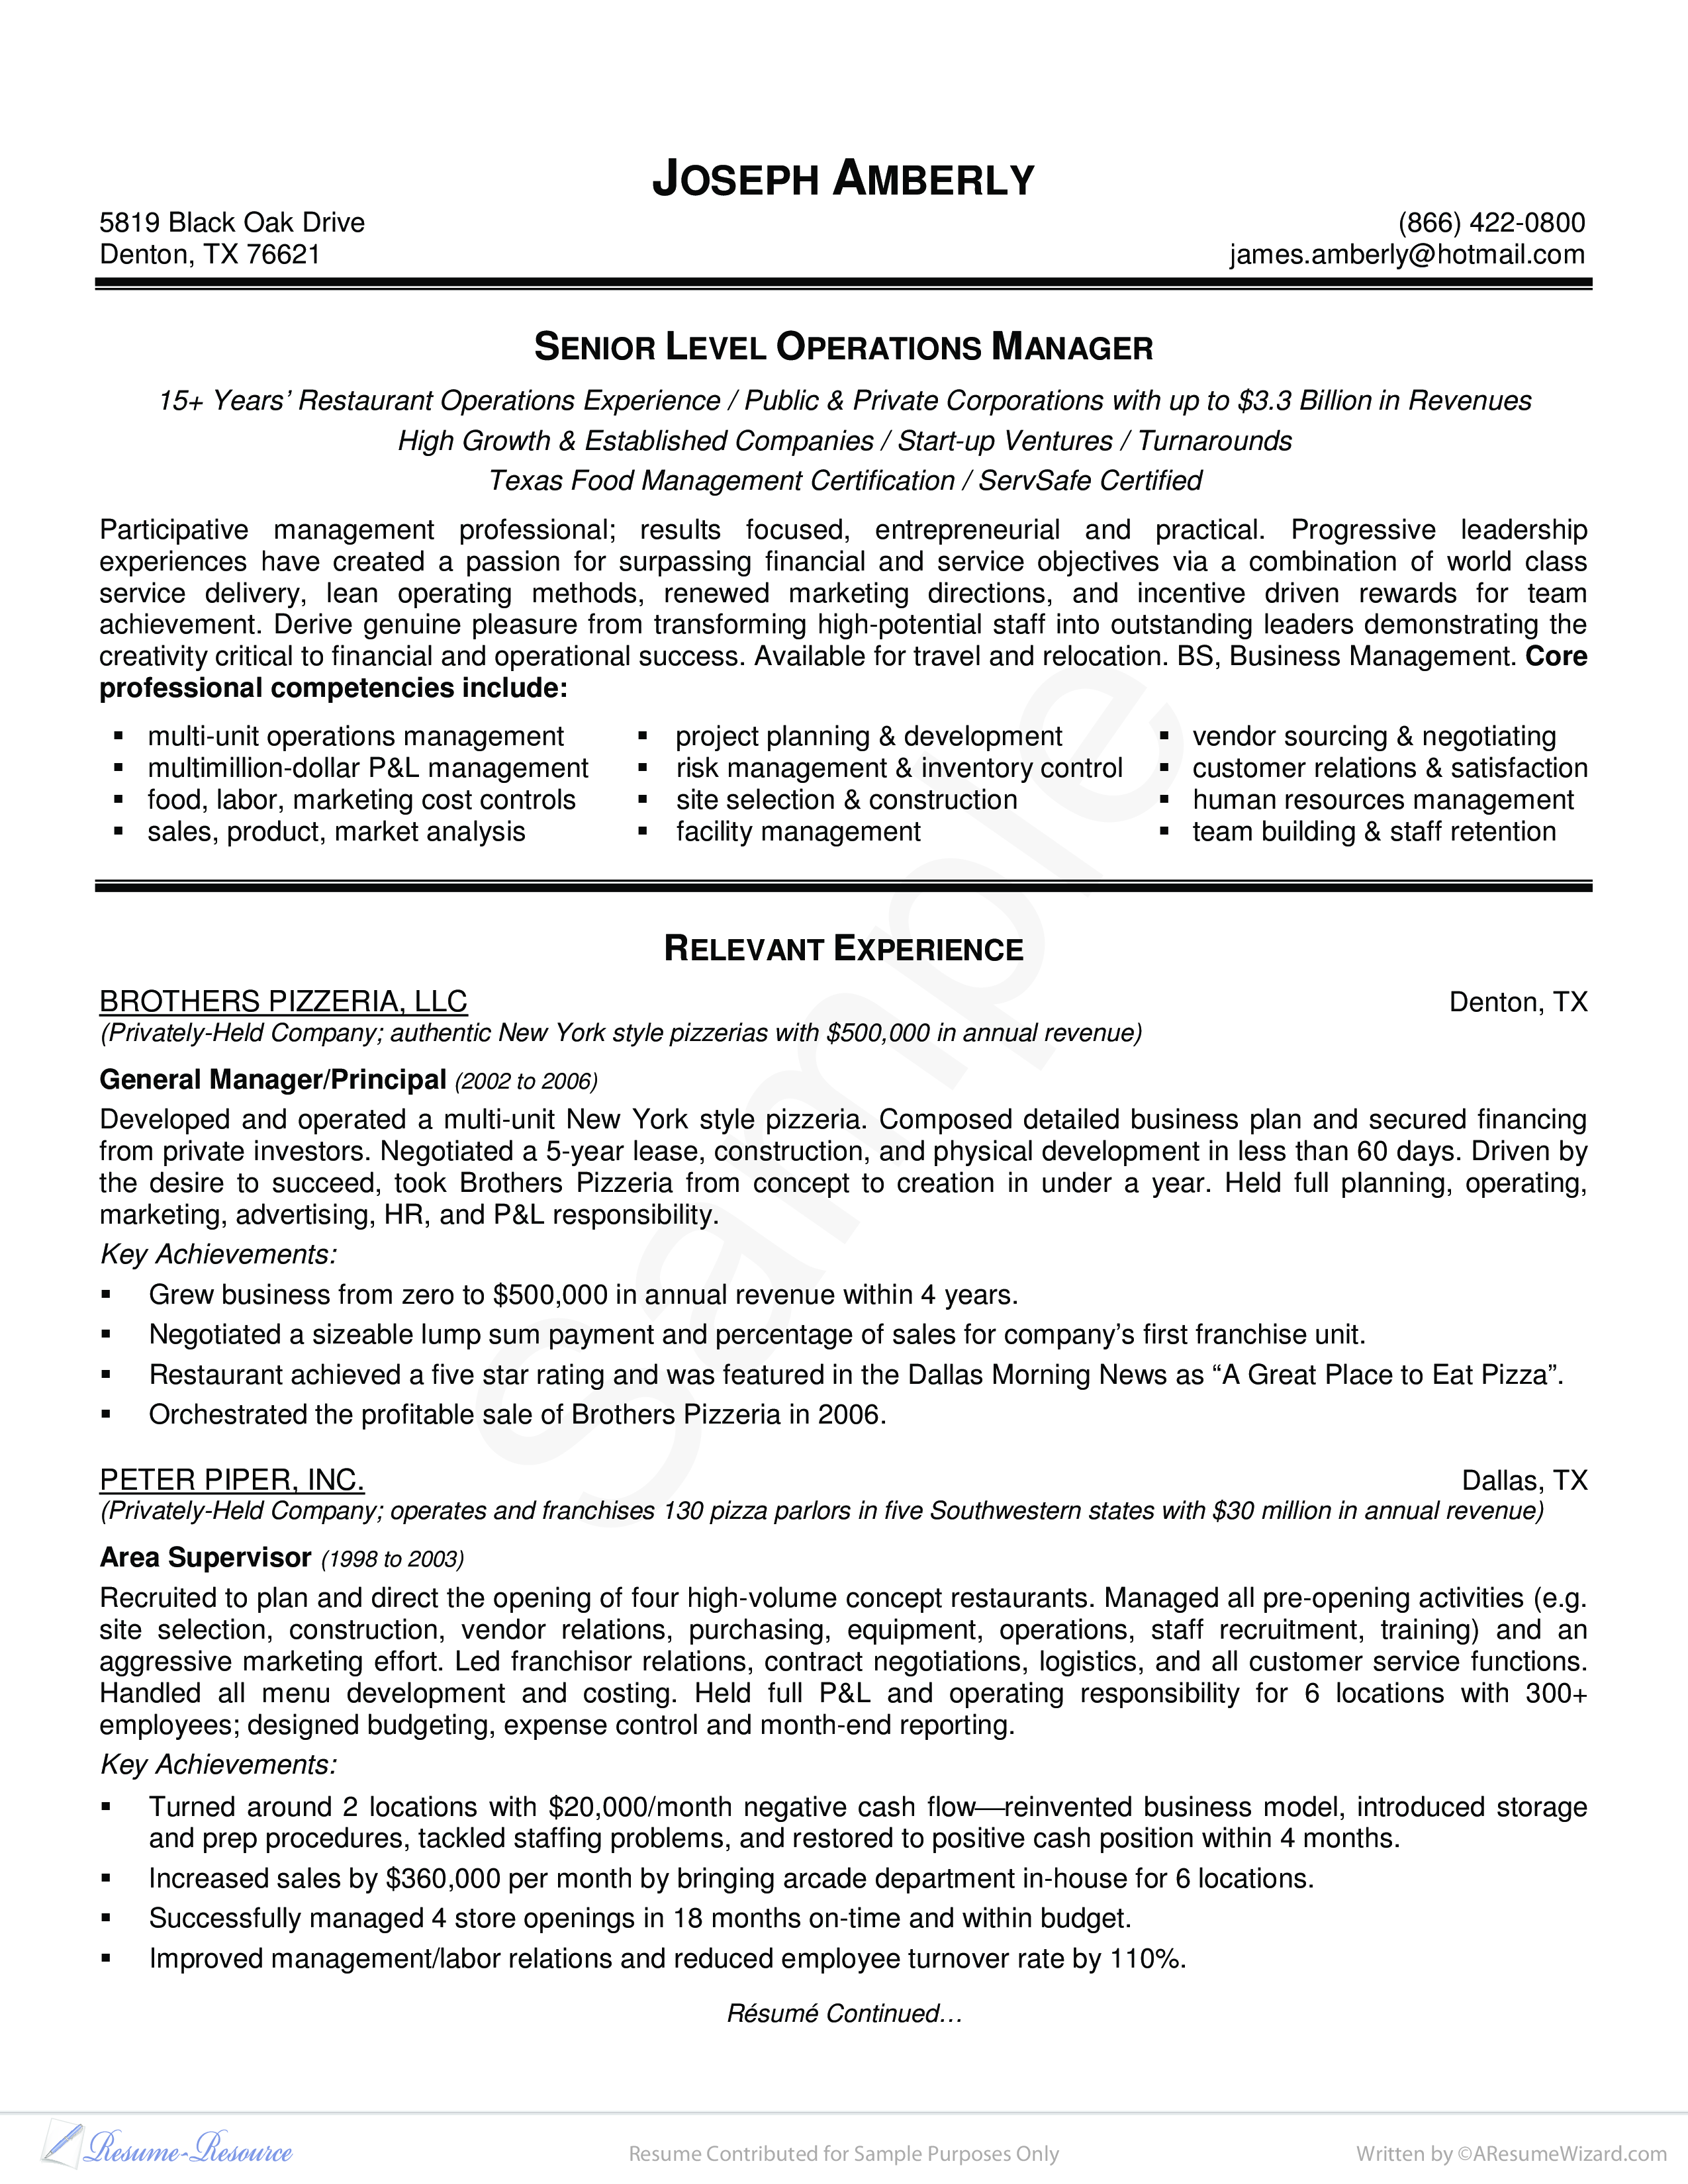 Examples Of Operation Manager Resume March 2022 Resume Database